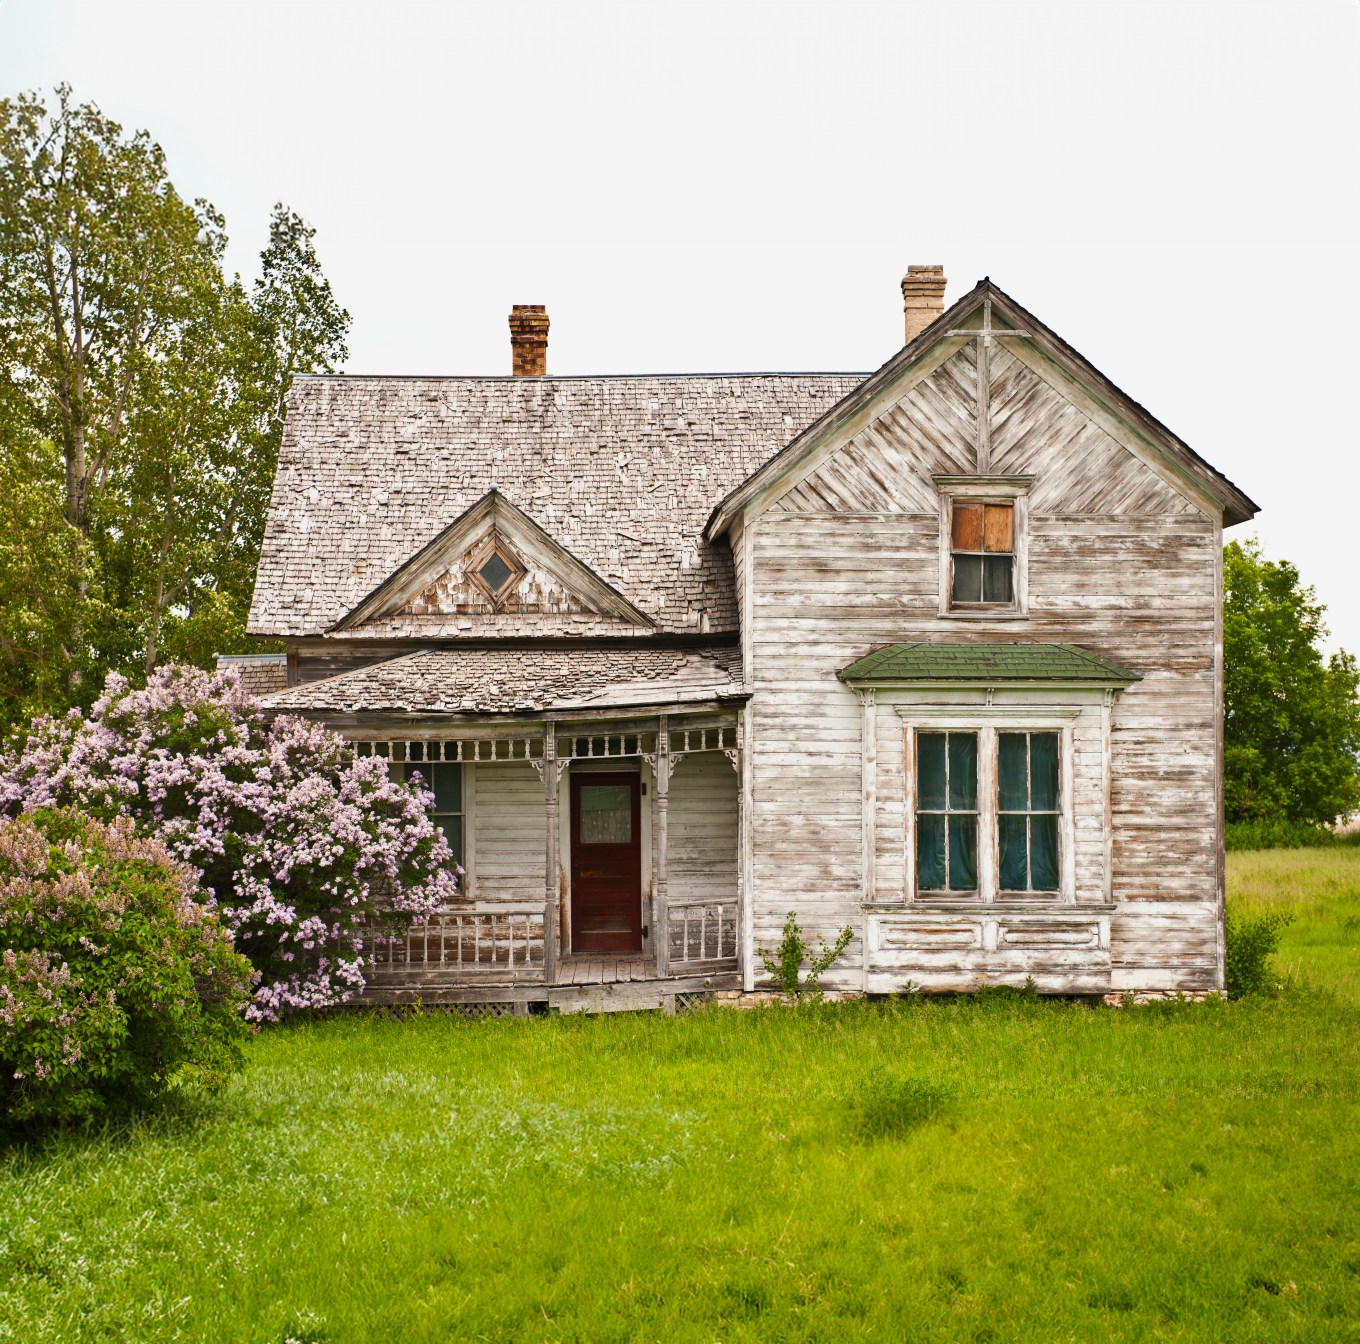 A dilapidated, abandoned fixer-upper house with lots of visible problems sitting in a nice yard with beautiful trees.